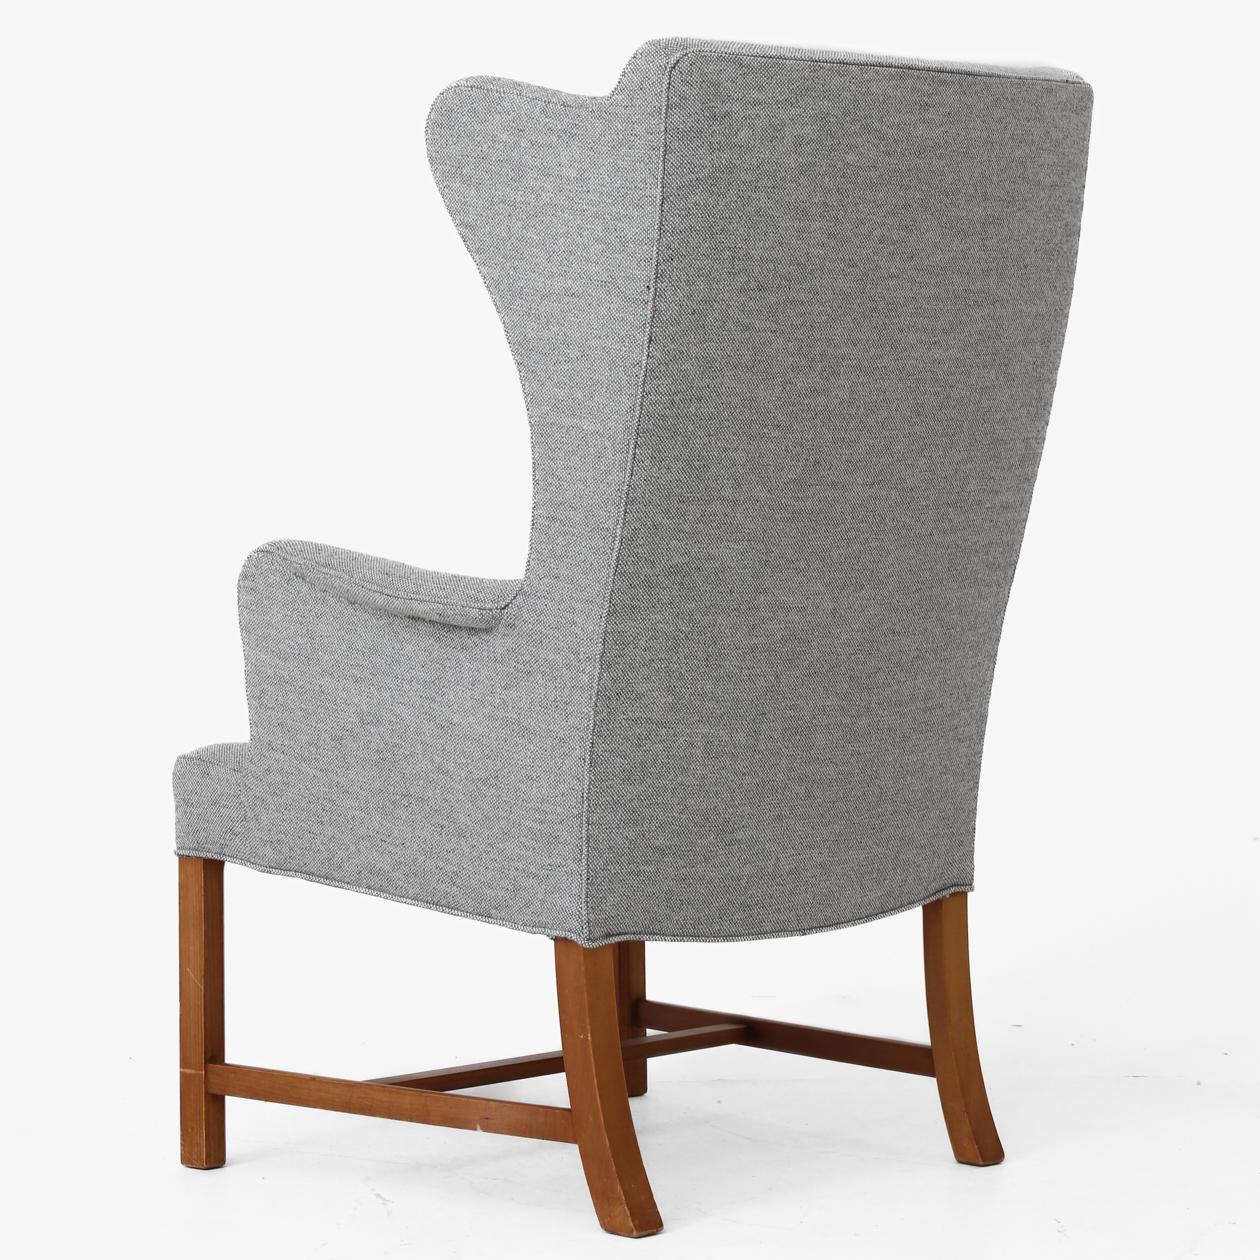 Wing back chair with cherry frame and new upholstery in Hallingdal 116. Designed in 1945. Børge Mogensen / Jacob Kjær.